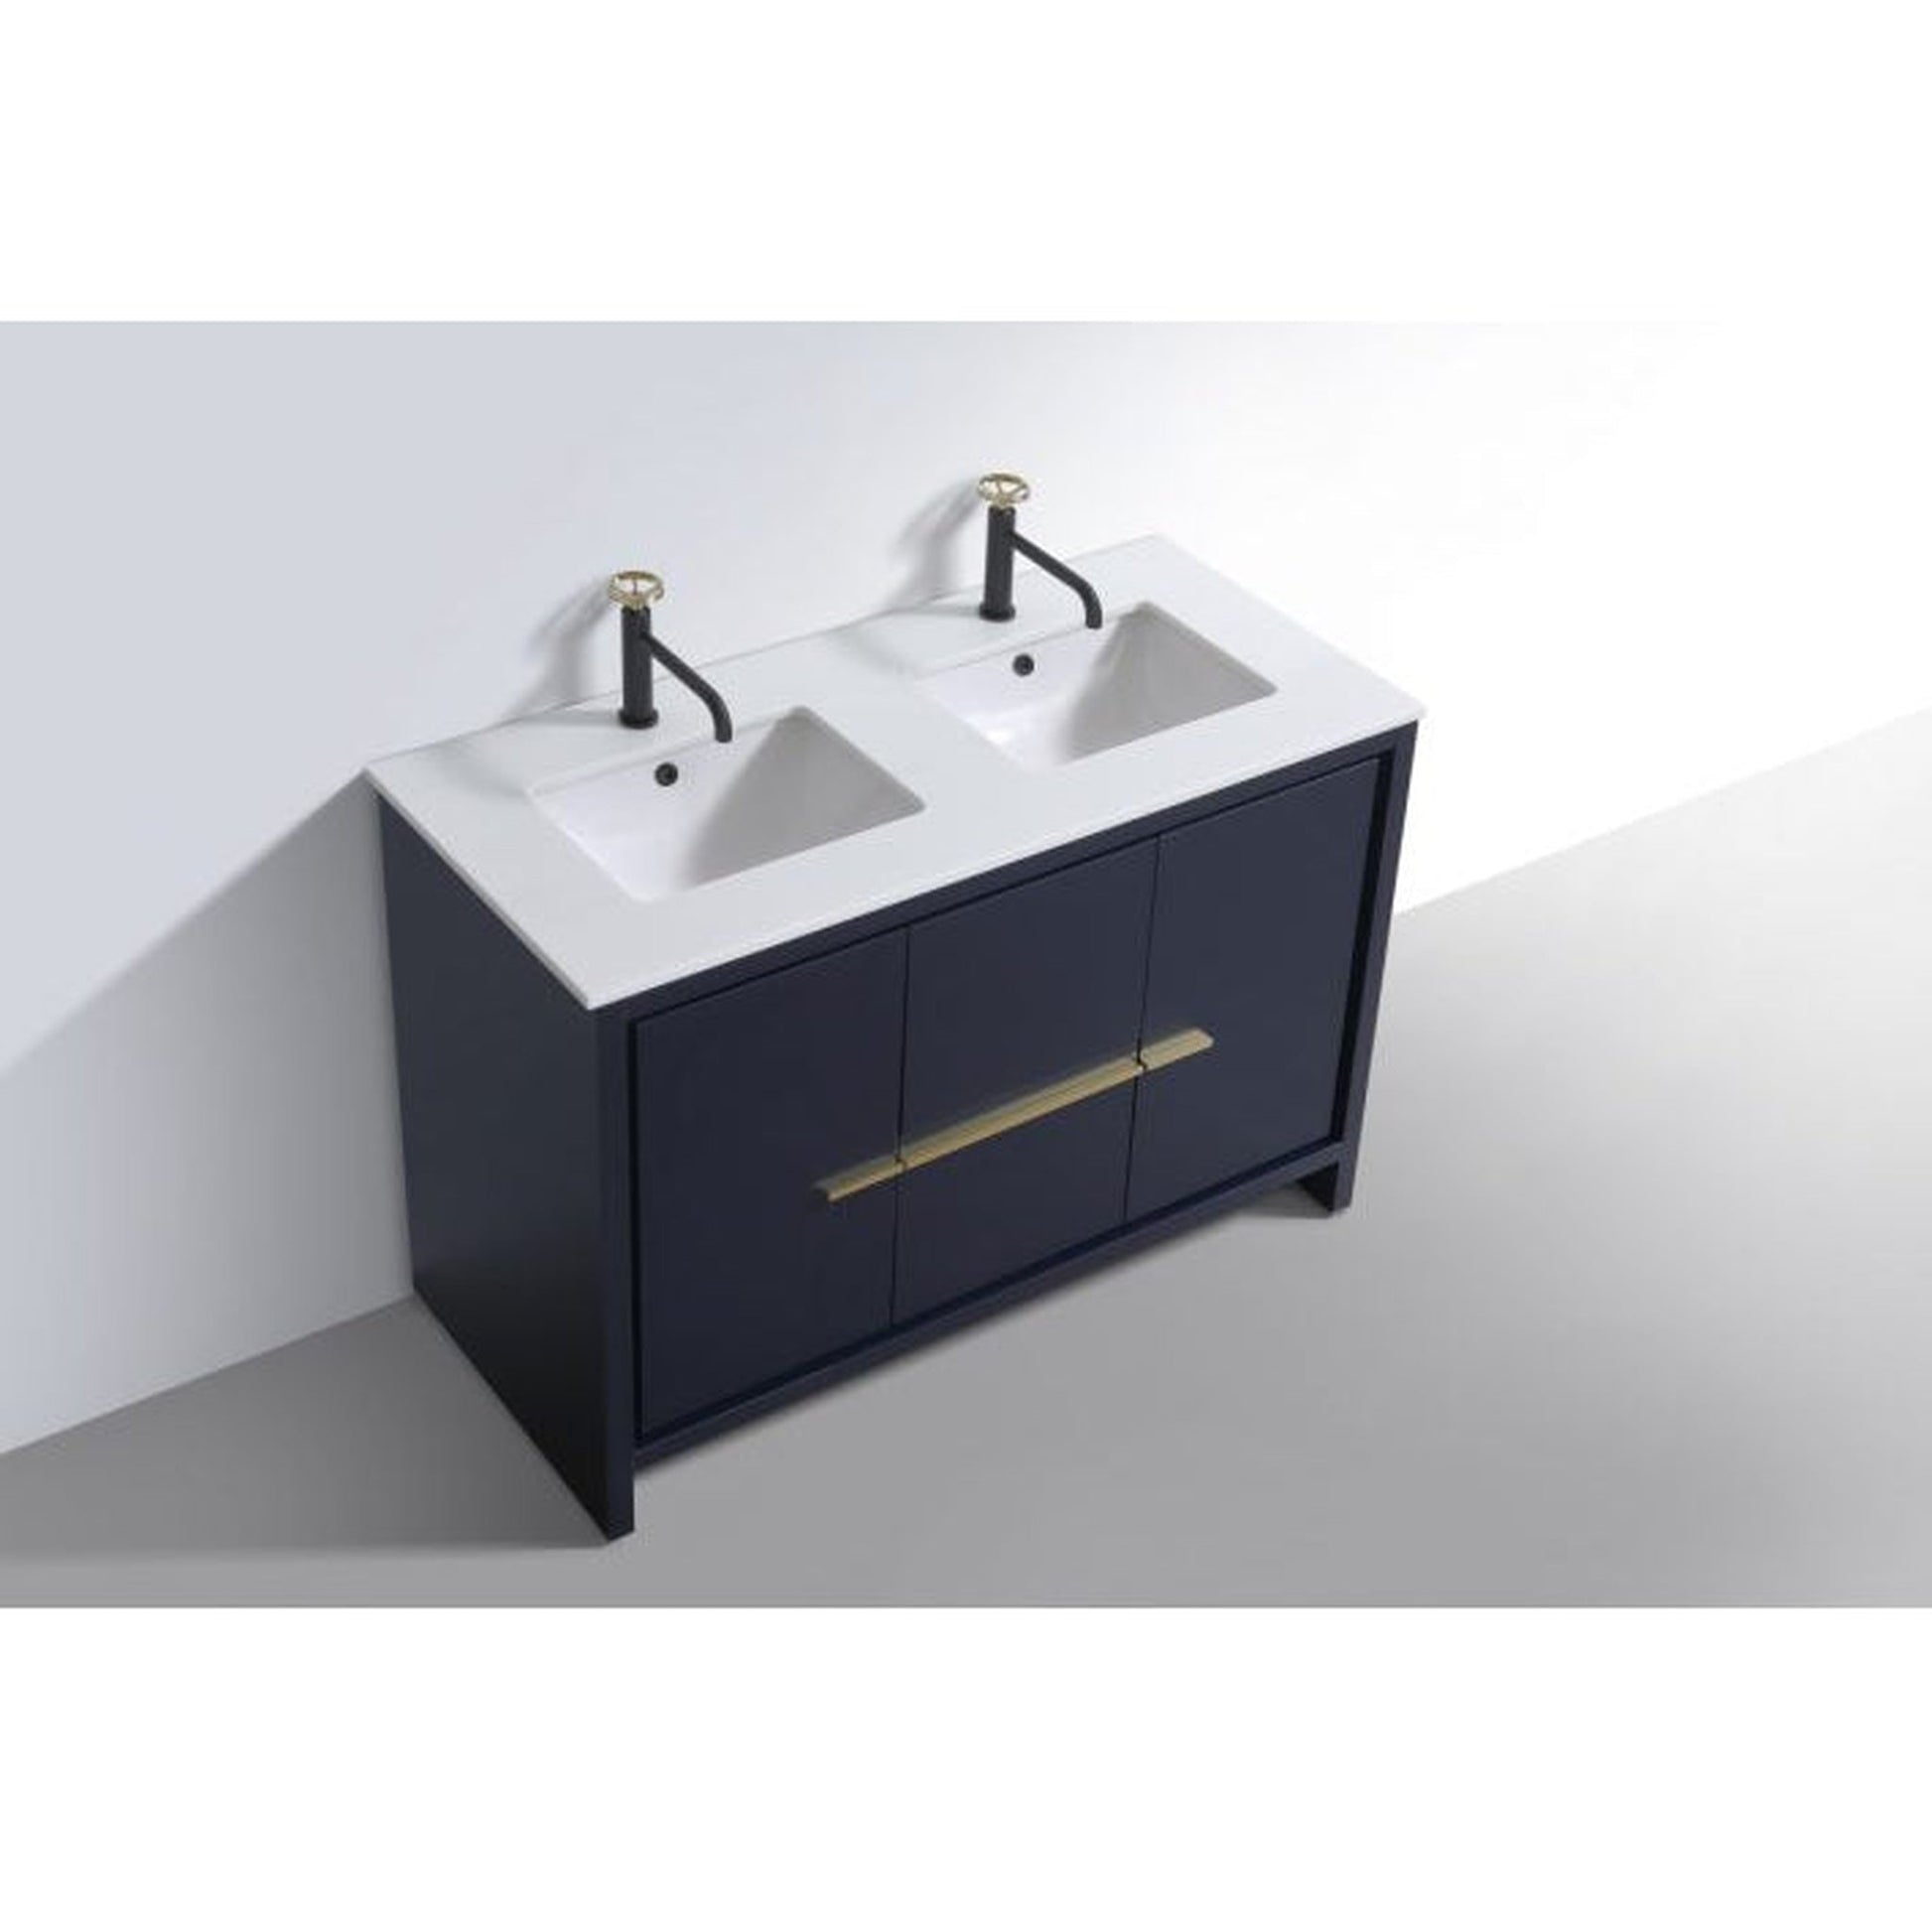 KubeBath Dolce 48" Blue Freestanding Modern Bathroom Vanity With Quartz Vanity Top & Ceramic Double Sink With Overflow and 48" White Framed Mirror With Shelf